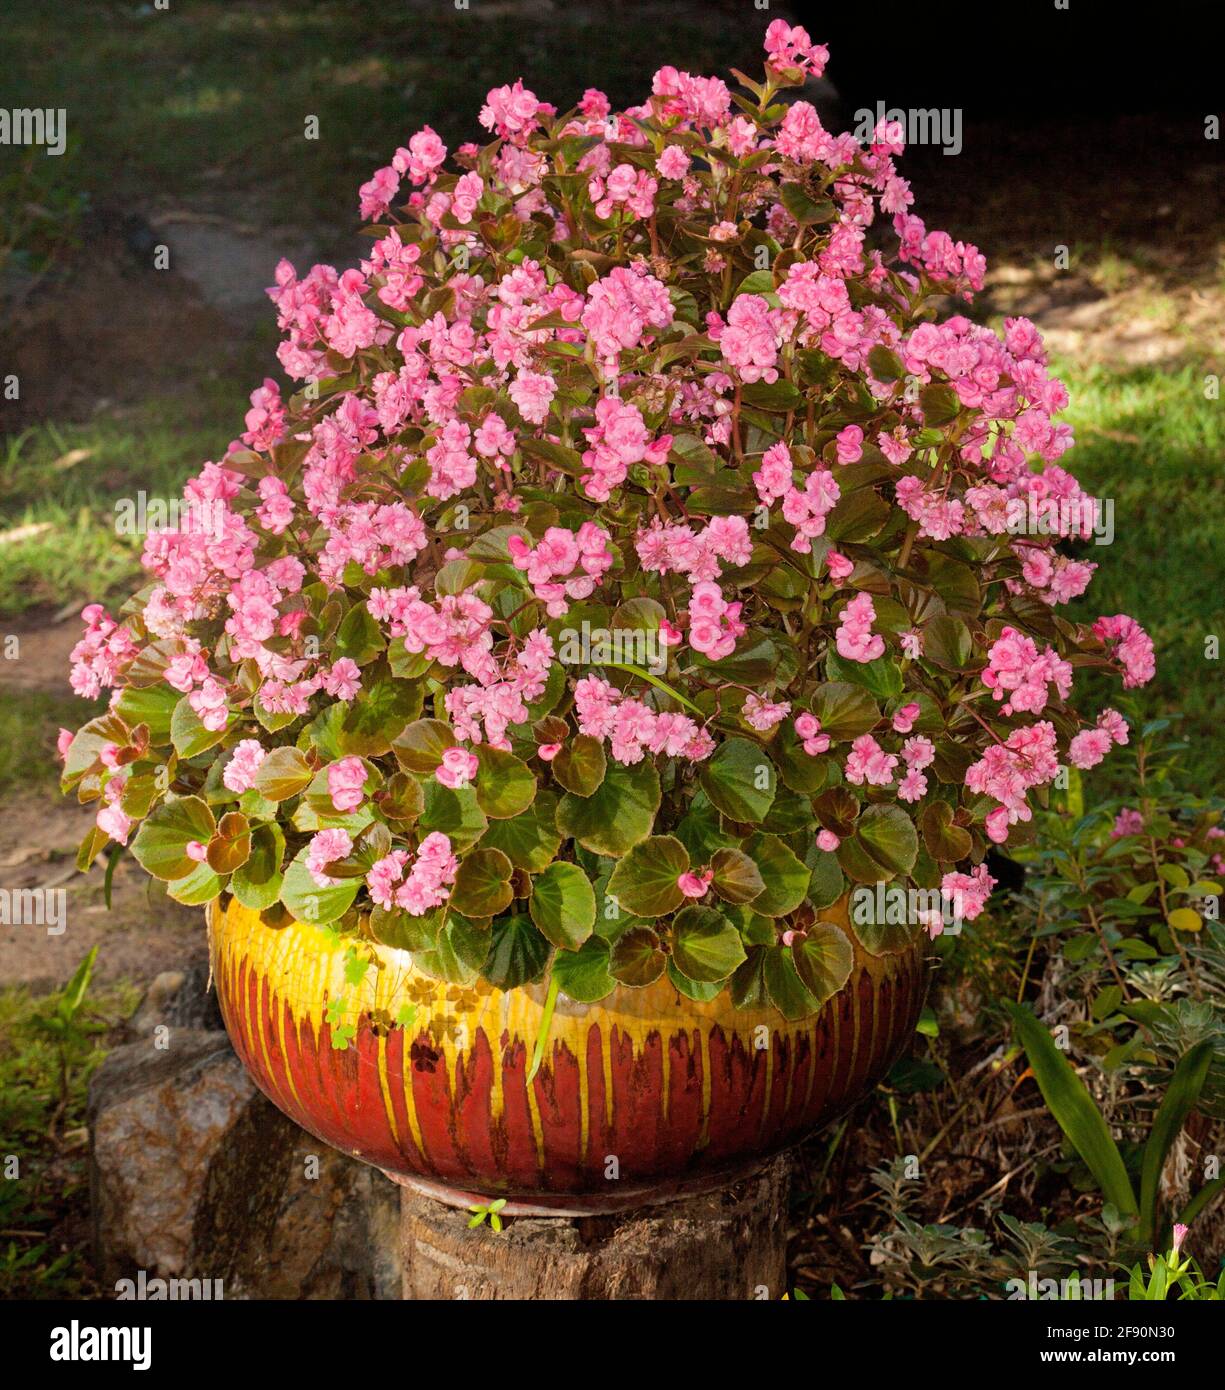 Mass of double pink flowers of bedding begonia, Begonia semperflorens, in a decorative container Stock Photo